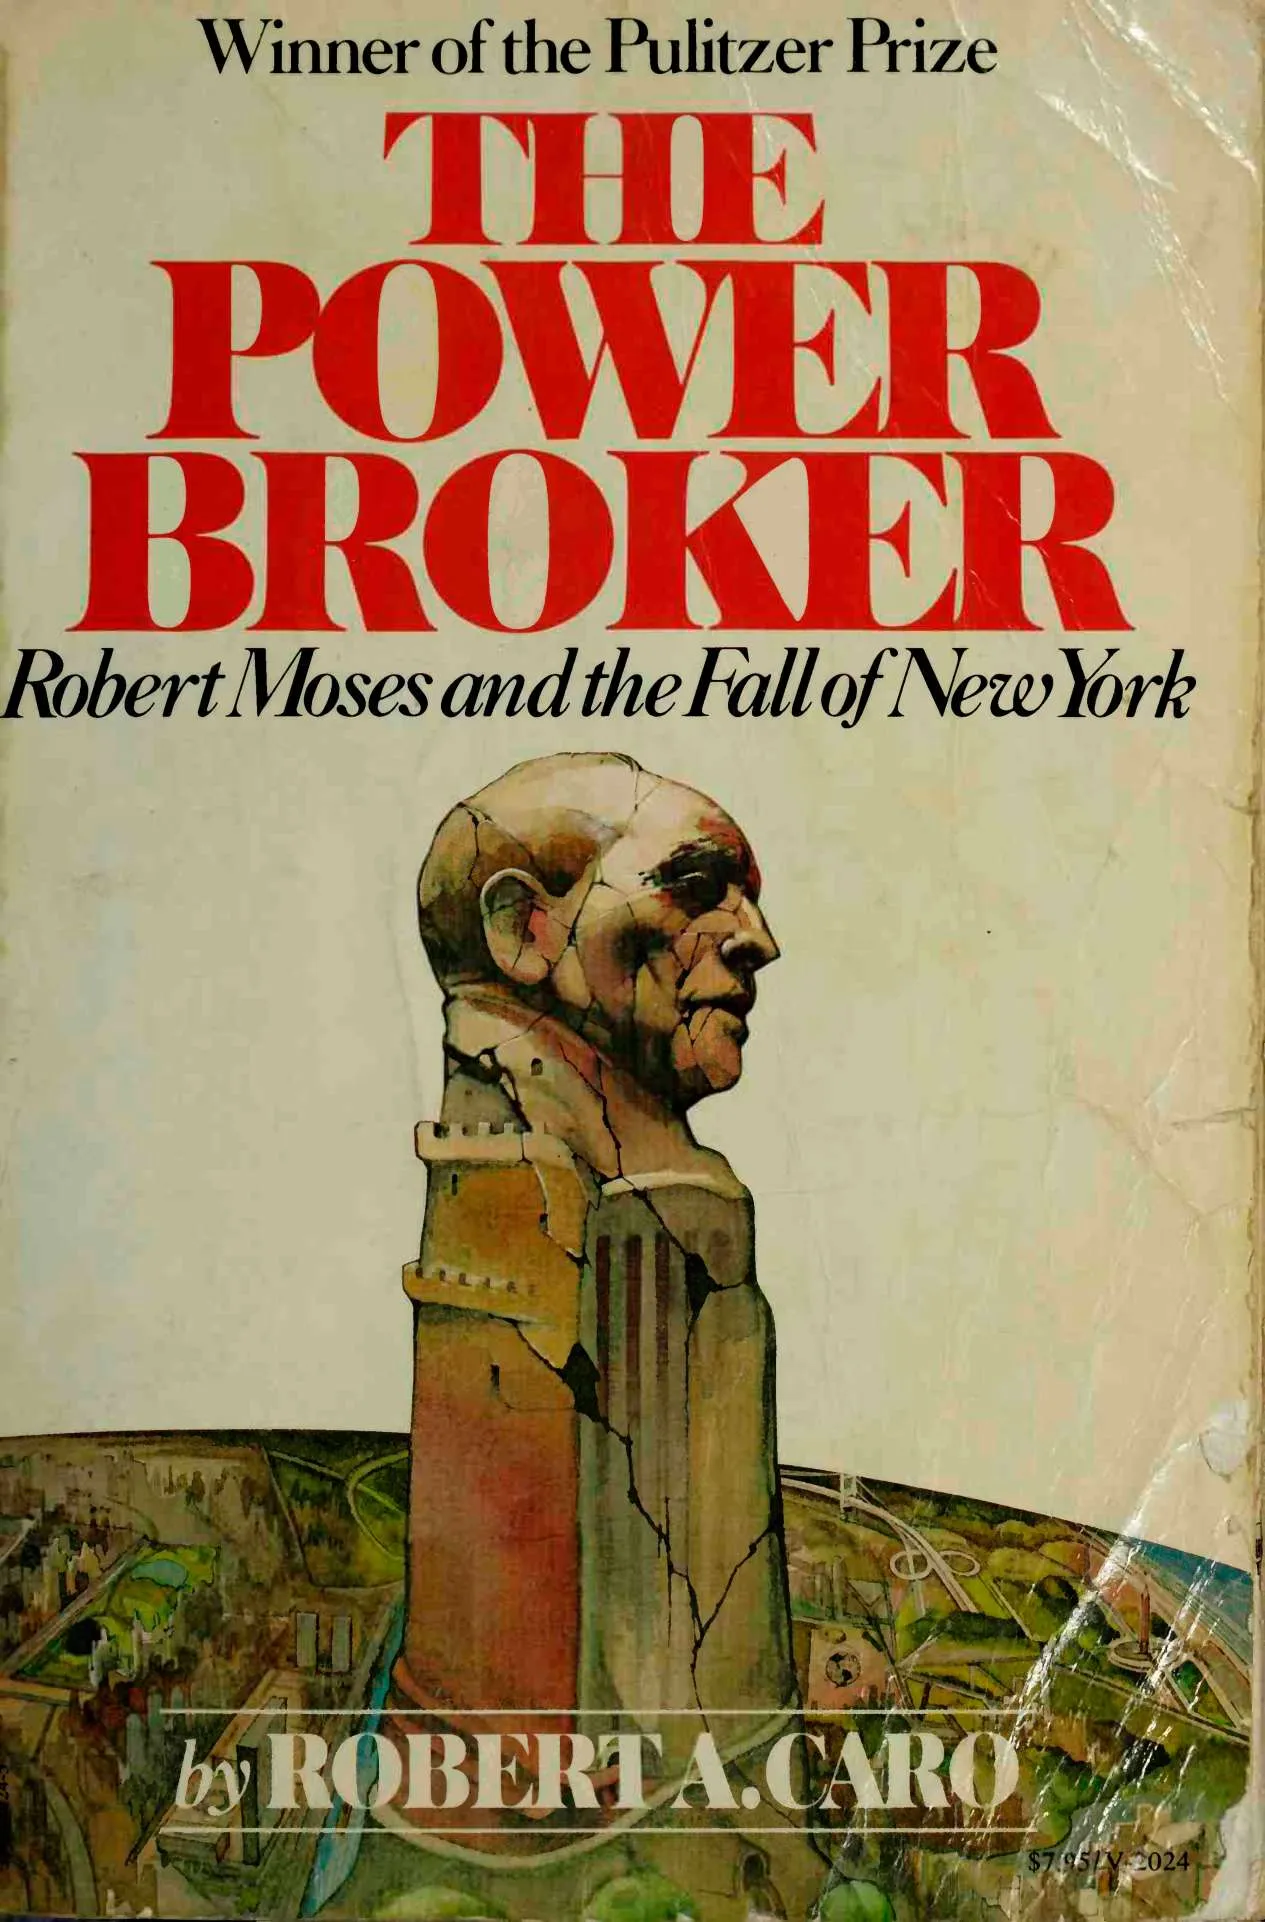 A cover image of the book titled The Power Broker